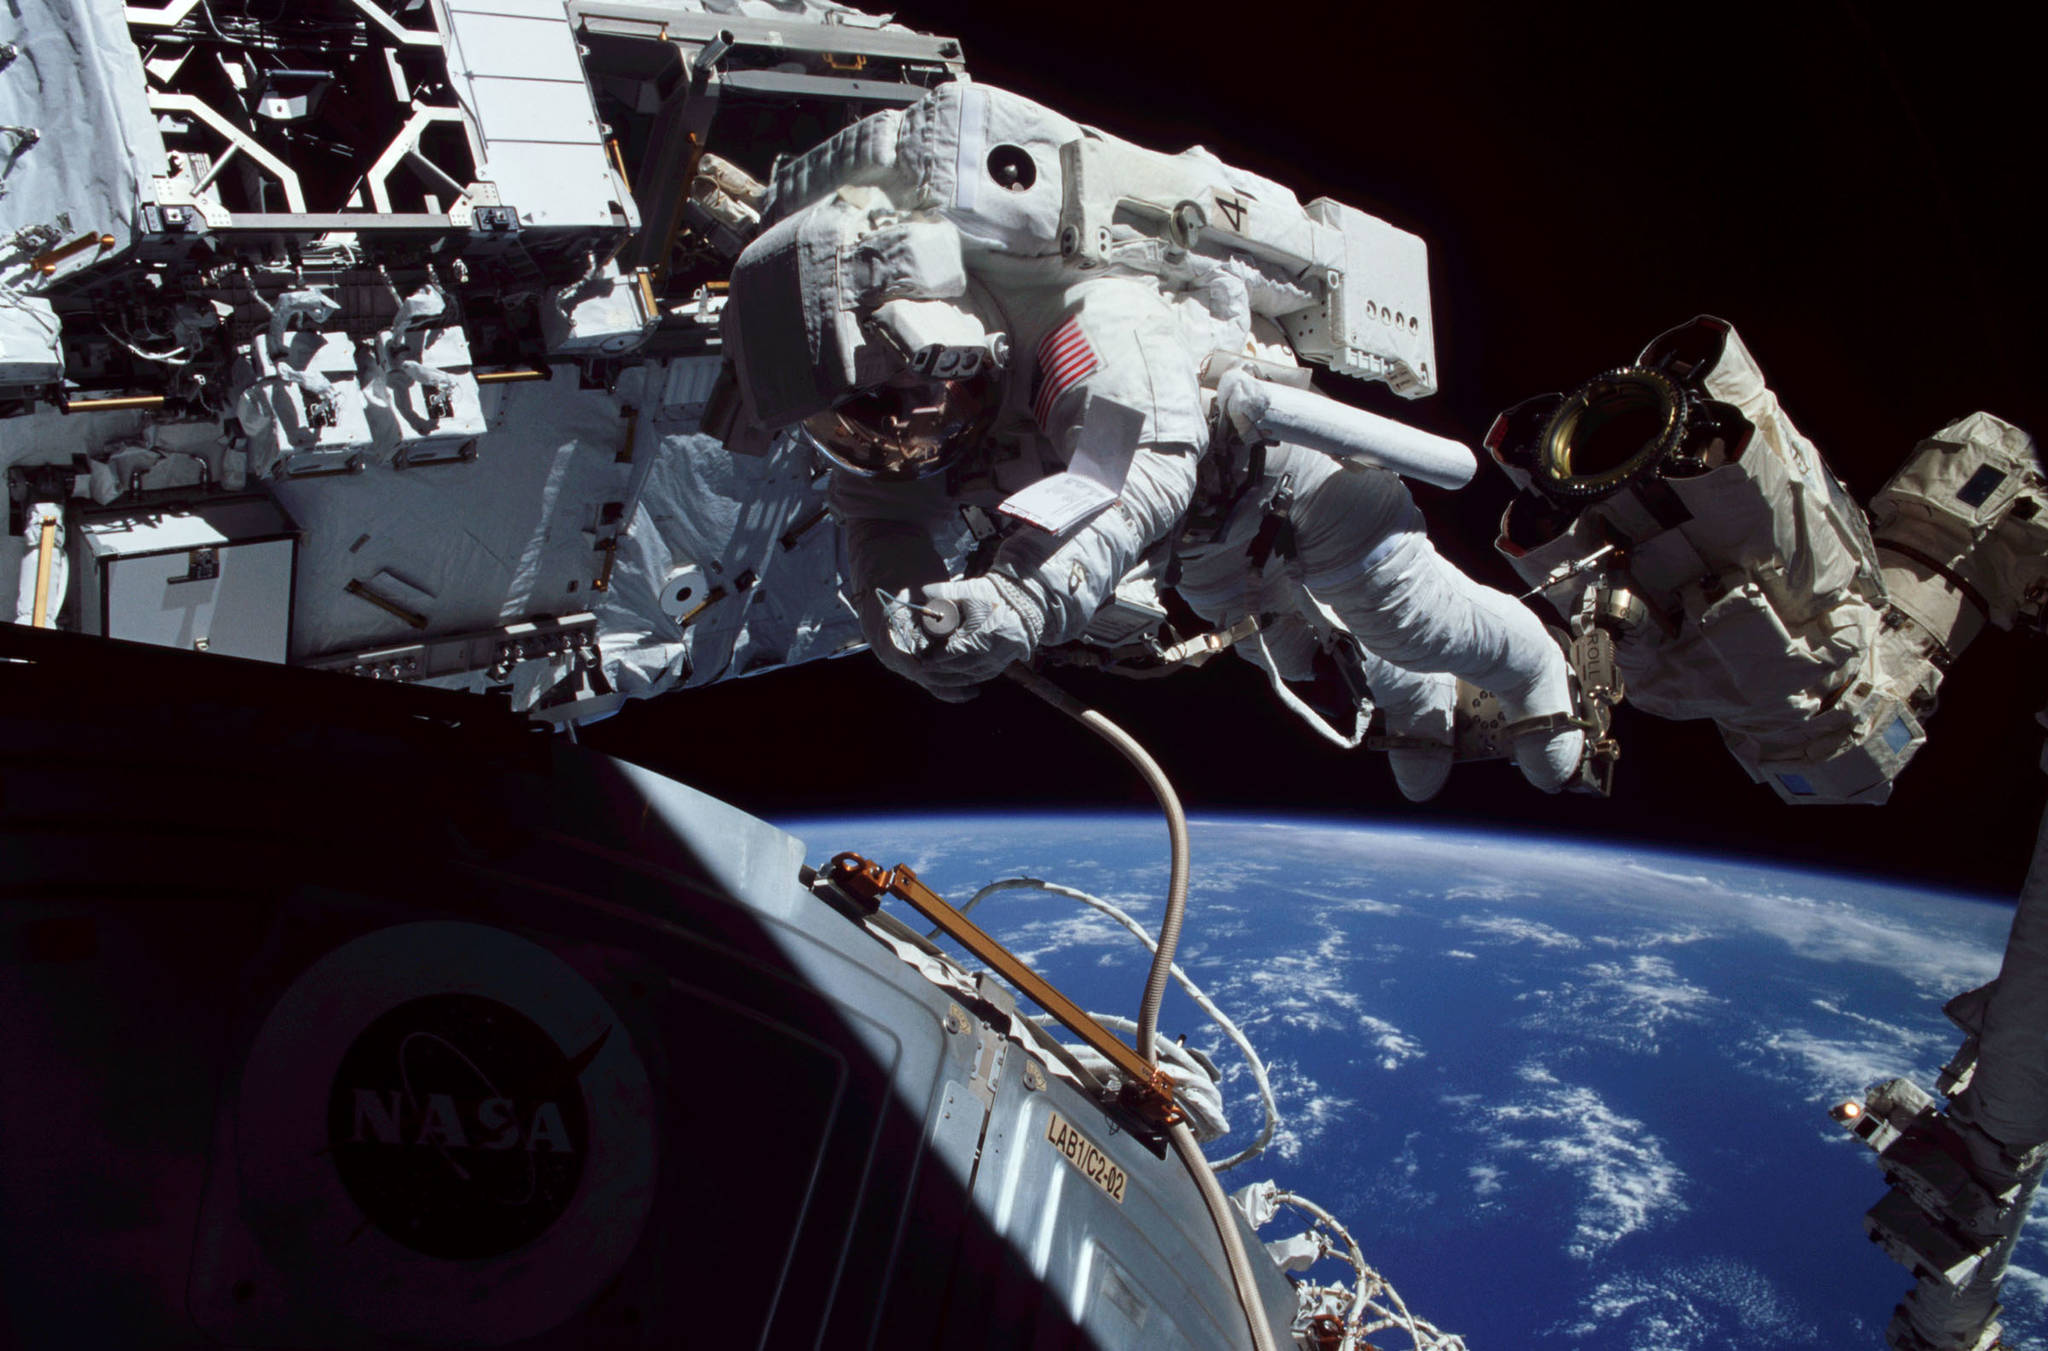 Astronaut Rex Walheim does a space walk in October 2009. (Photo provided)